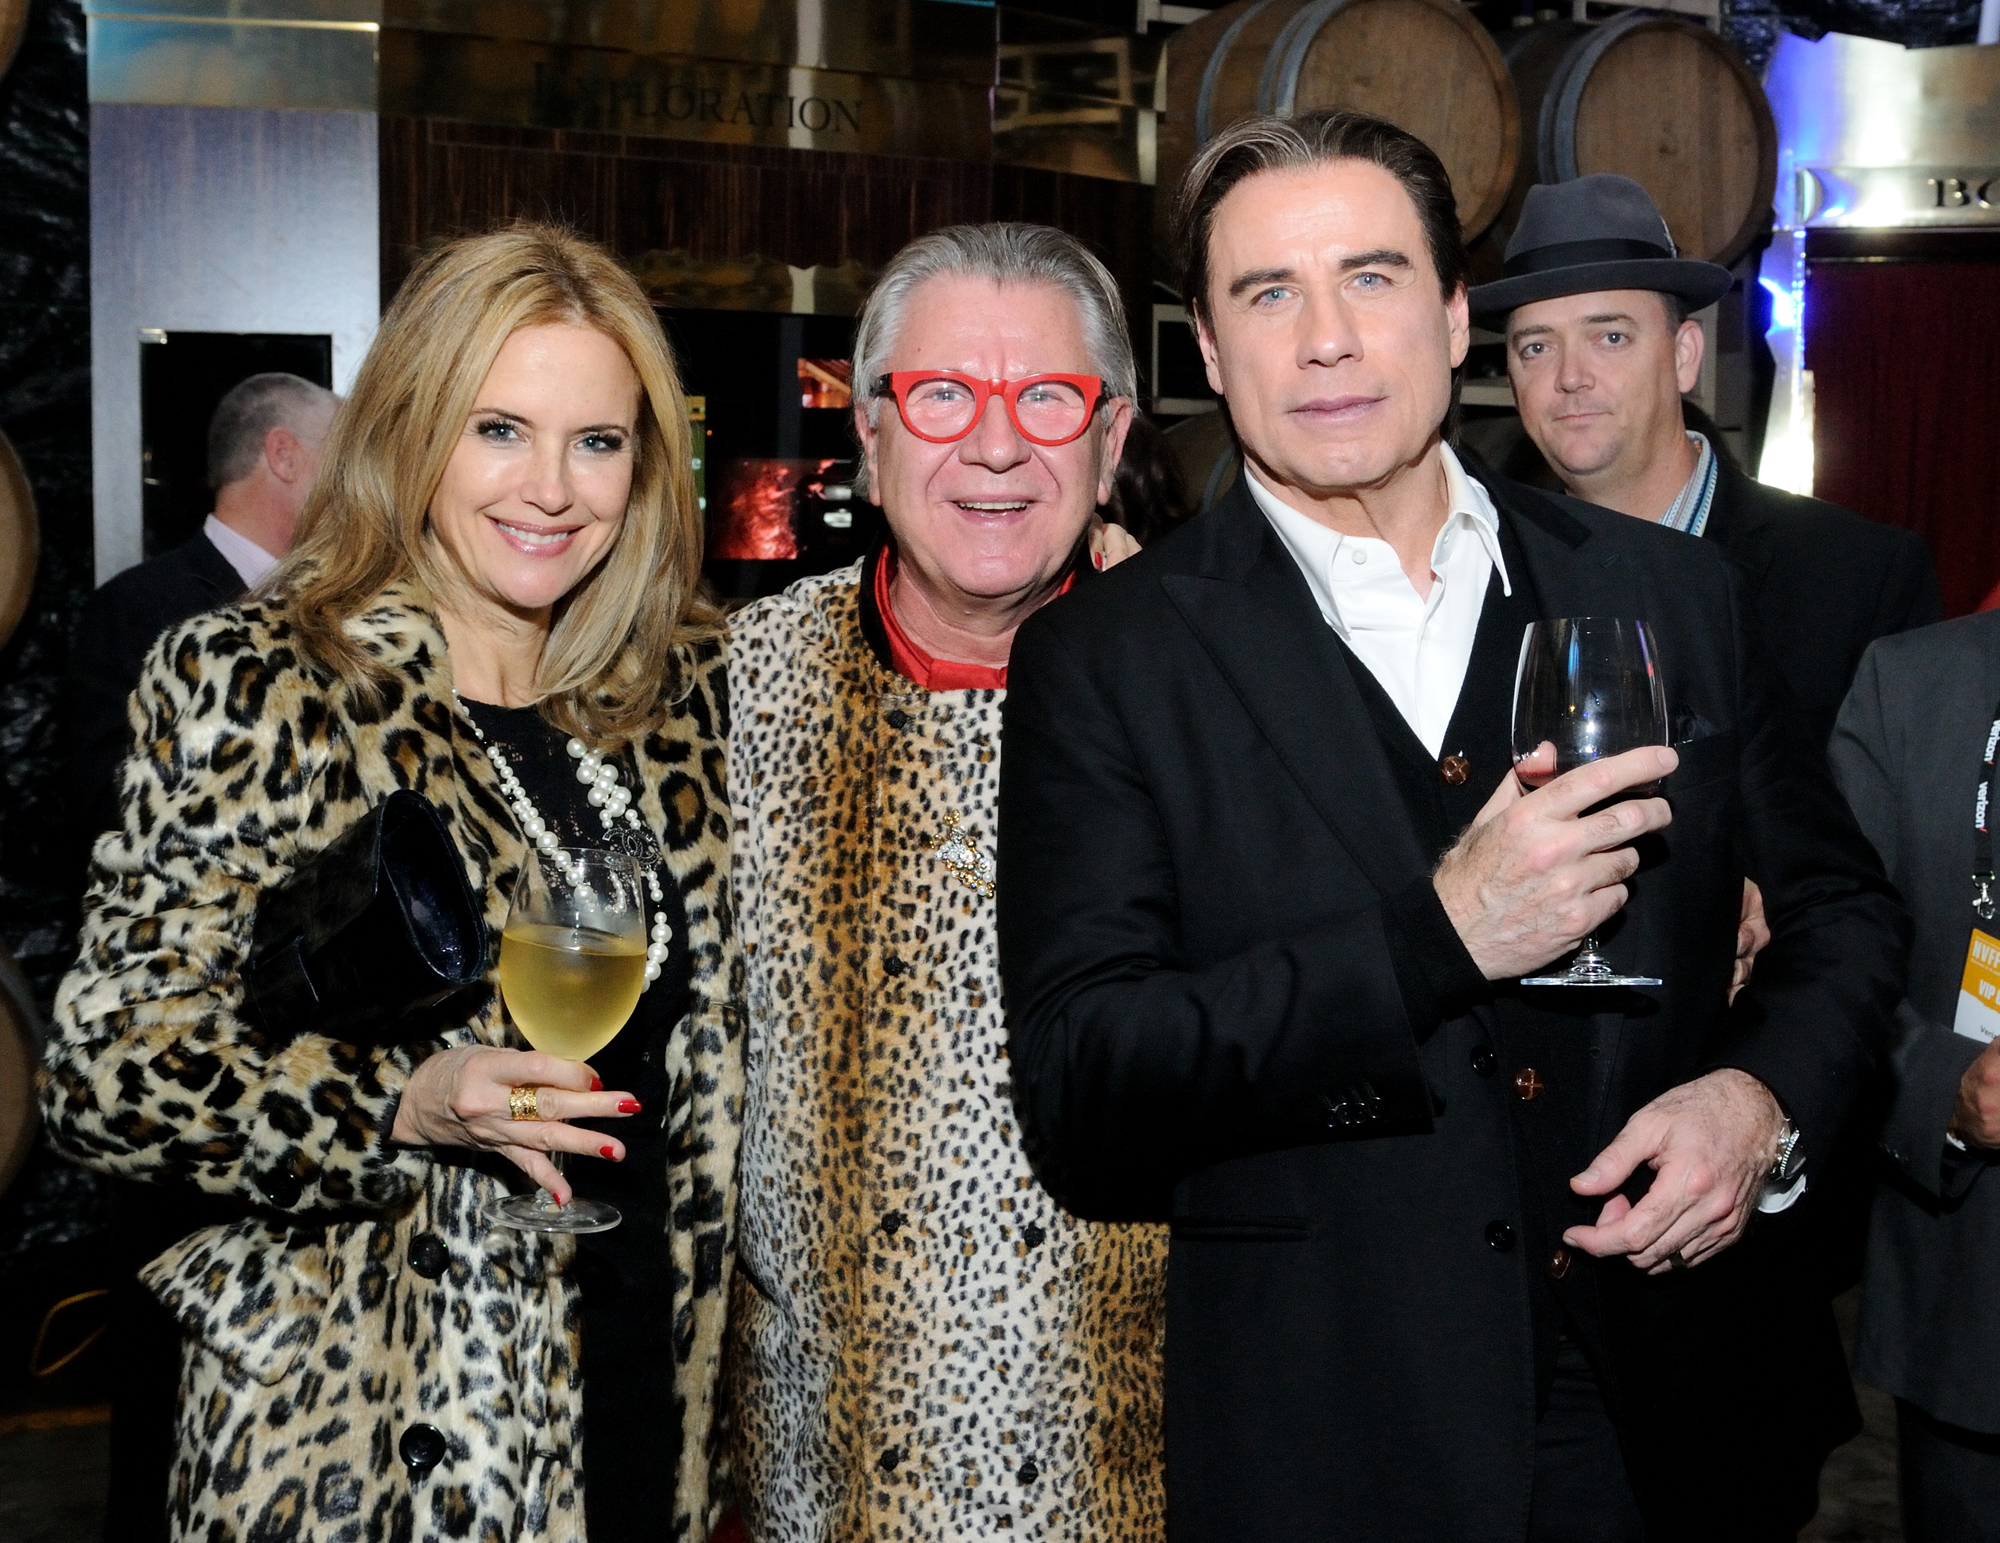 Raymond Chef with Travolta and Wife